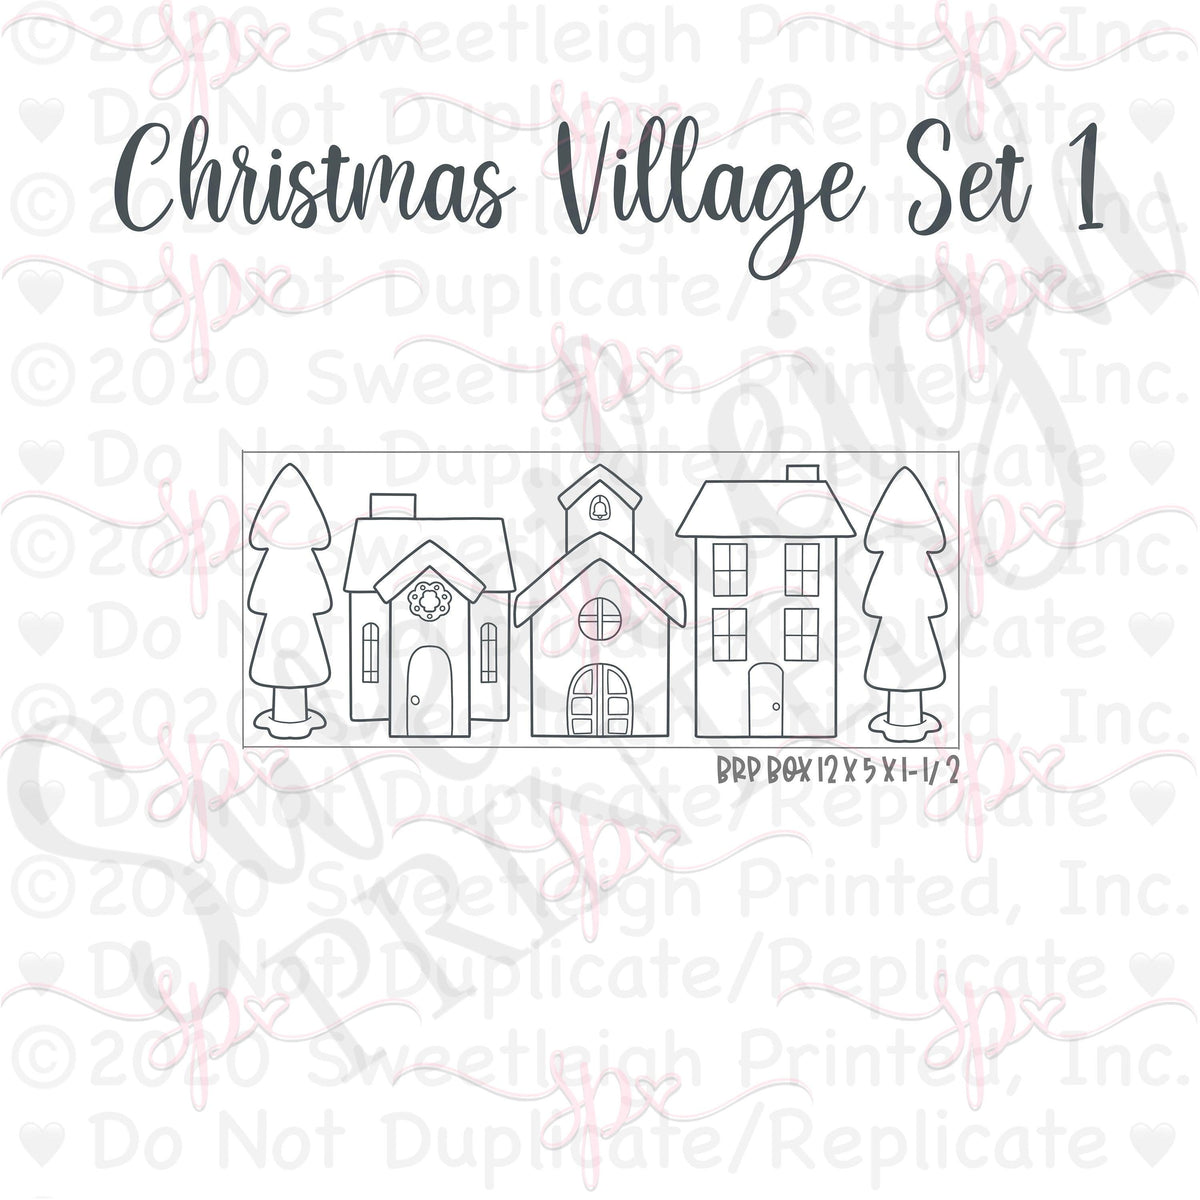 Christmas Village Cookie Cutter Sets - Sweetleigh 